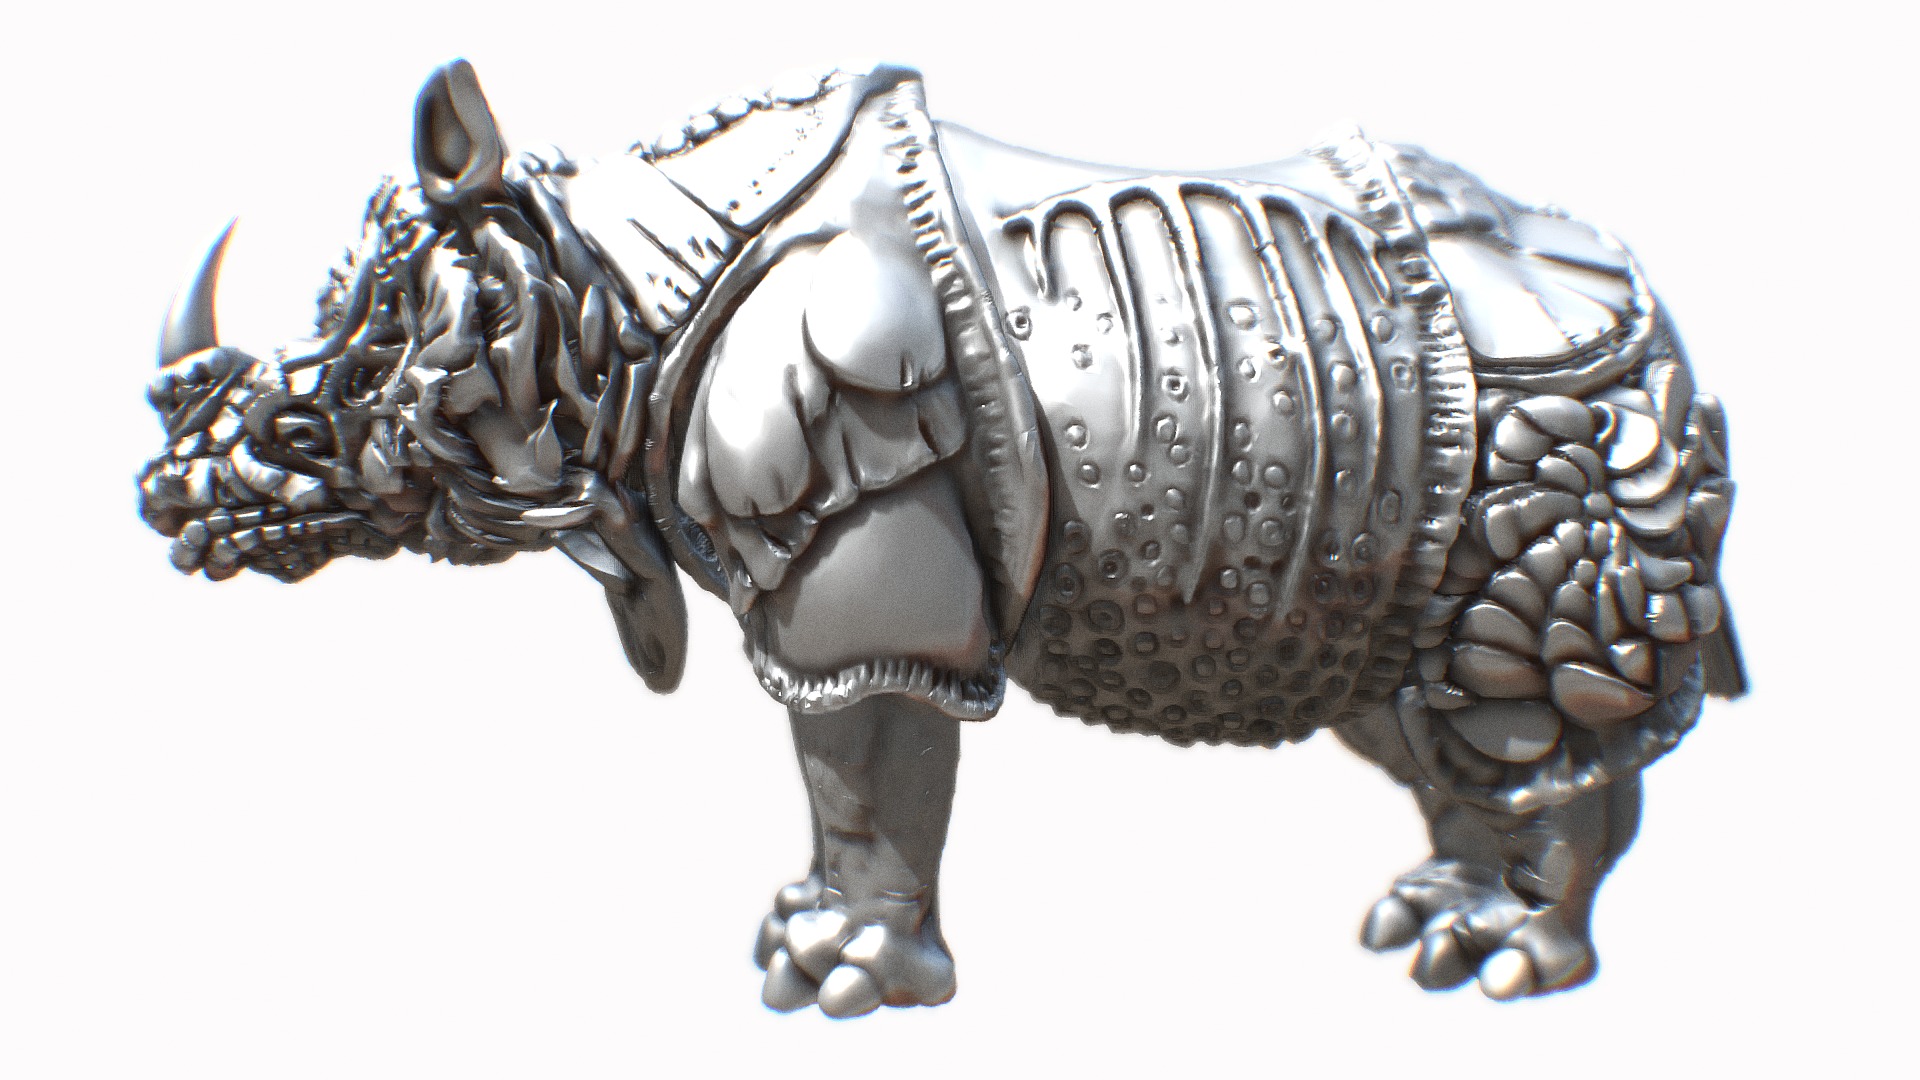 3D model Rhino - This is a 3D model of the Rhino. The 3D model is about a metal sculpture of an animal.